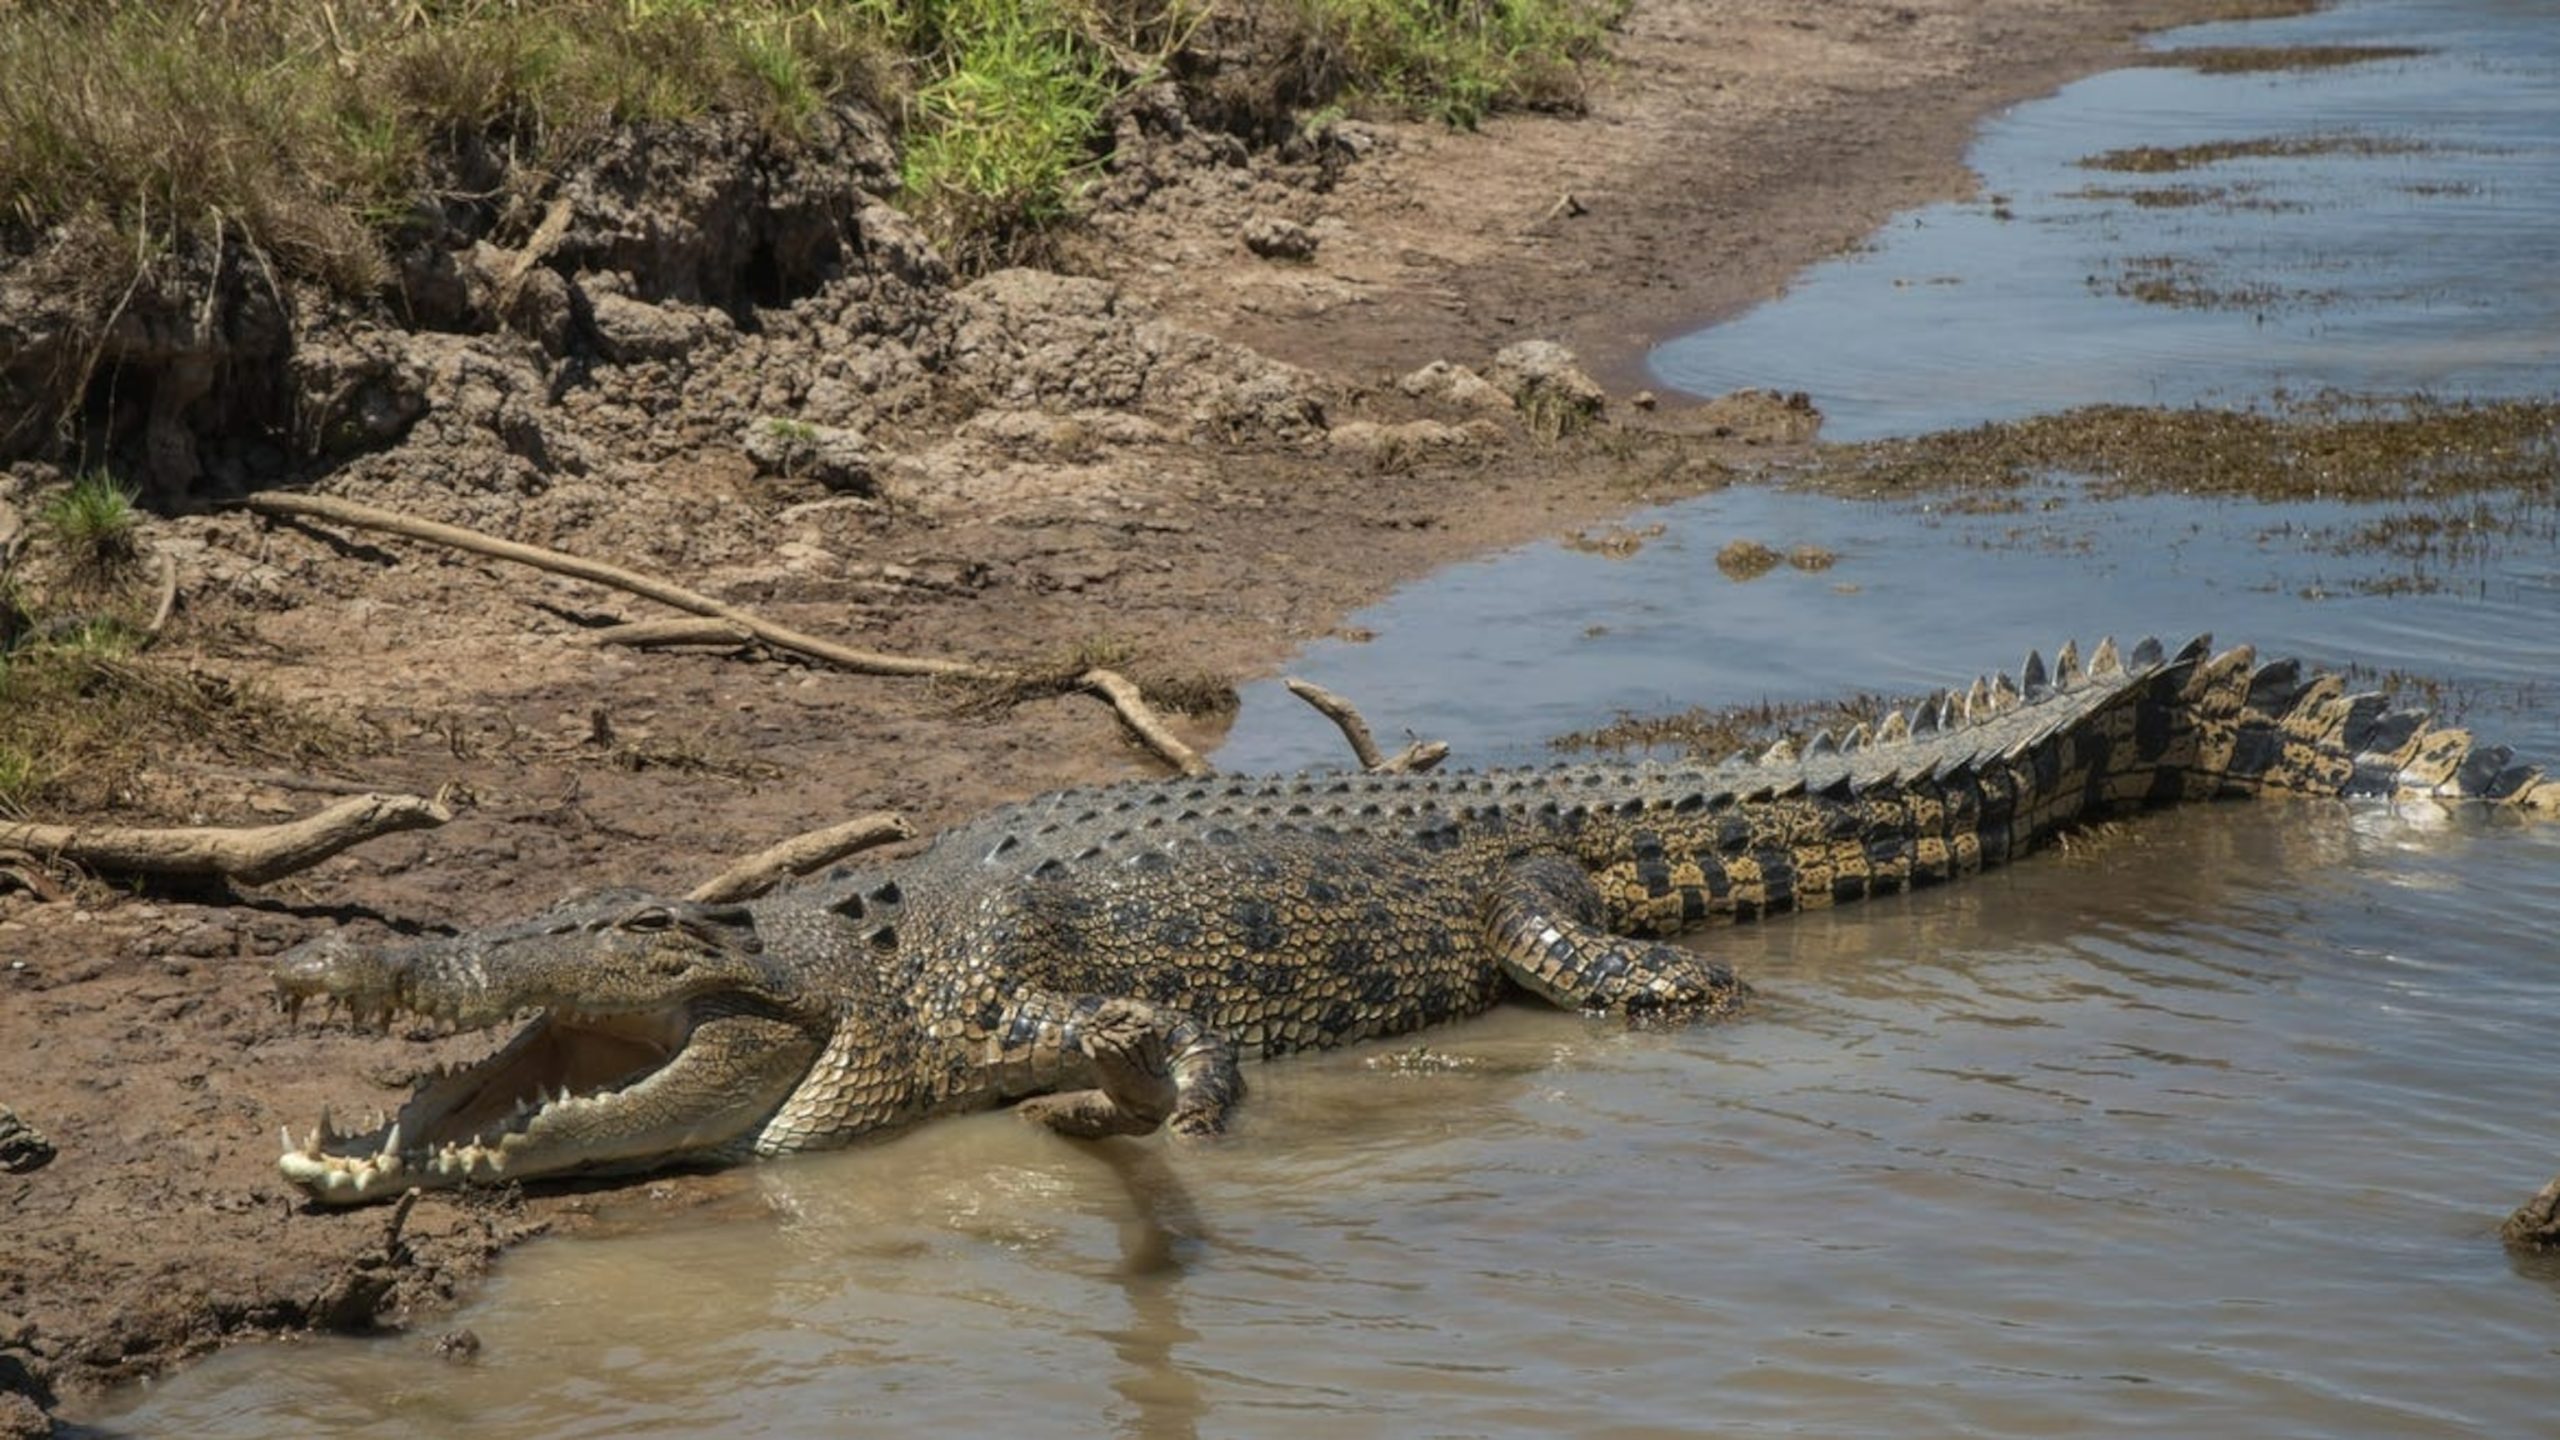 Report of 12-Year-Old Child Missing After Crocodile Attack and Abduction